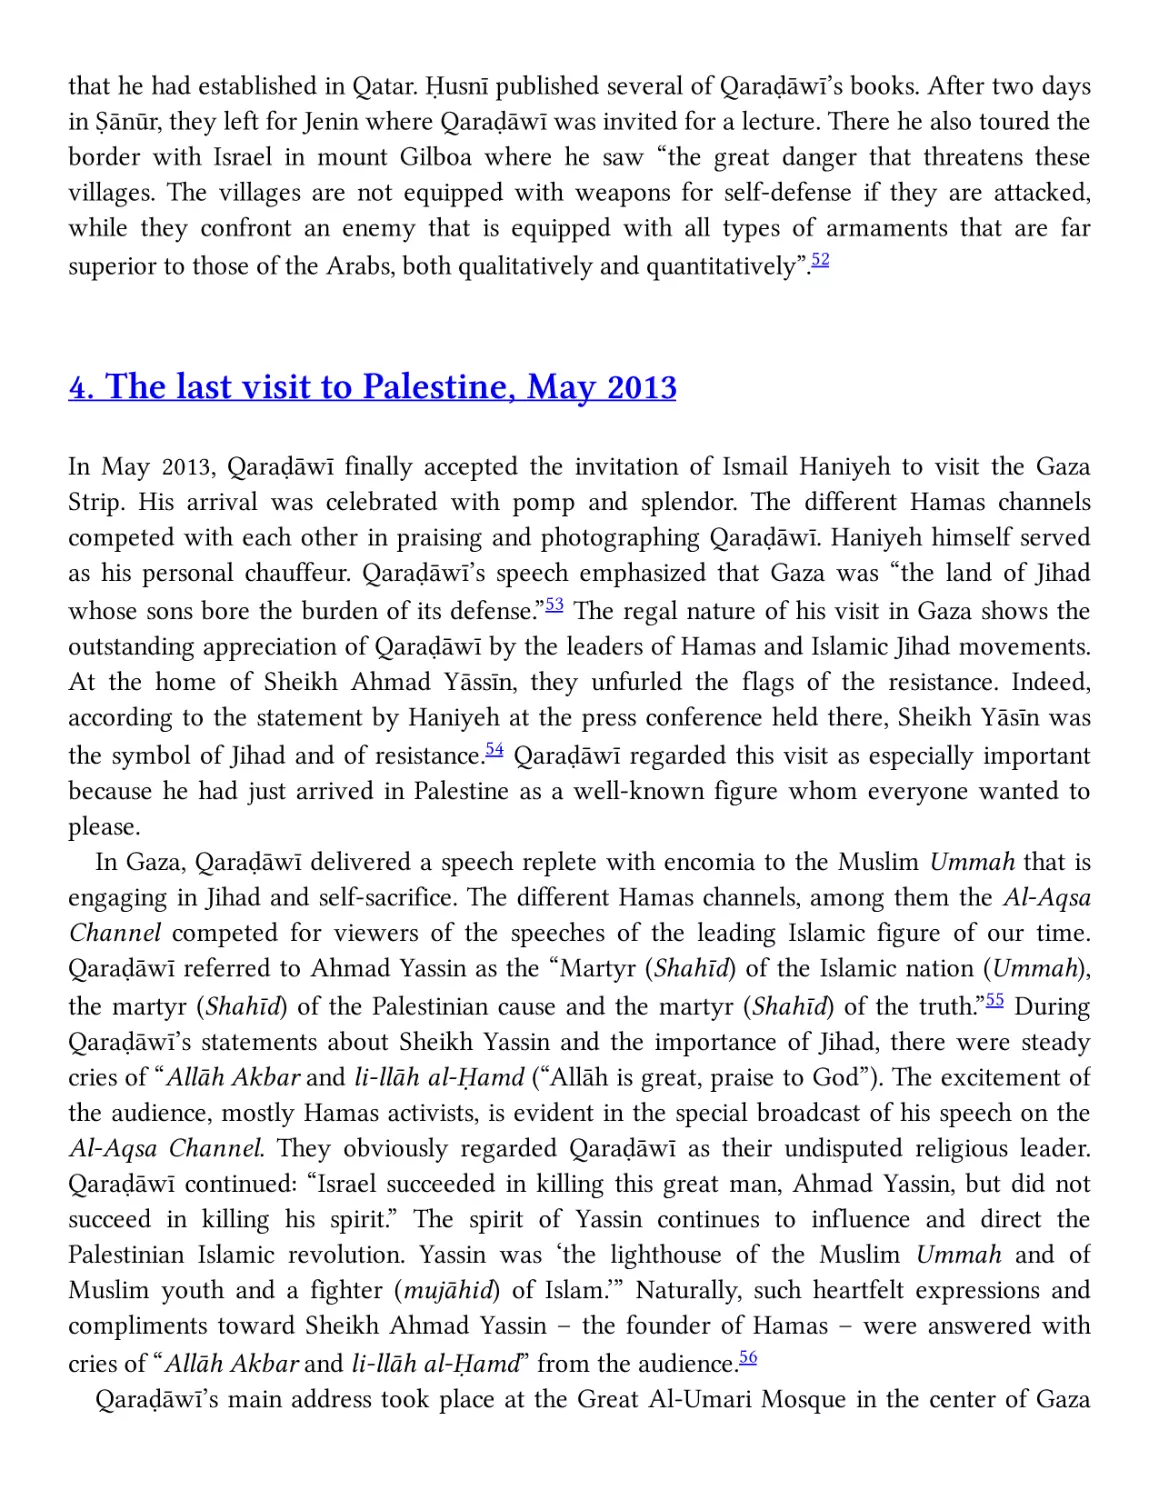 4. The last visit to Palestine, May 2013